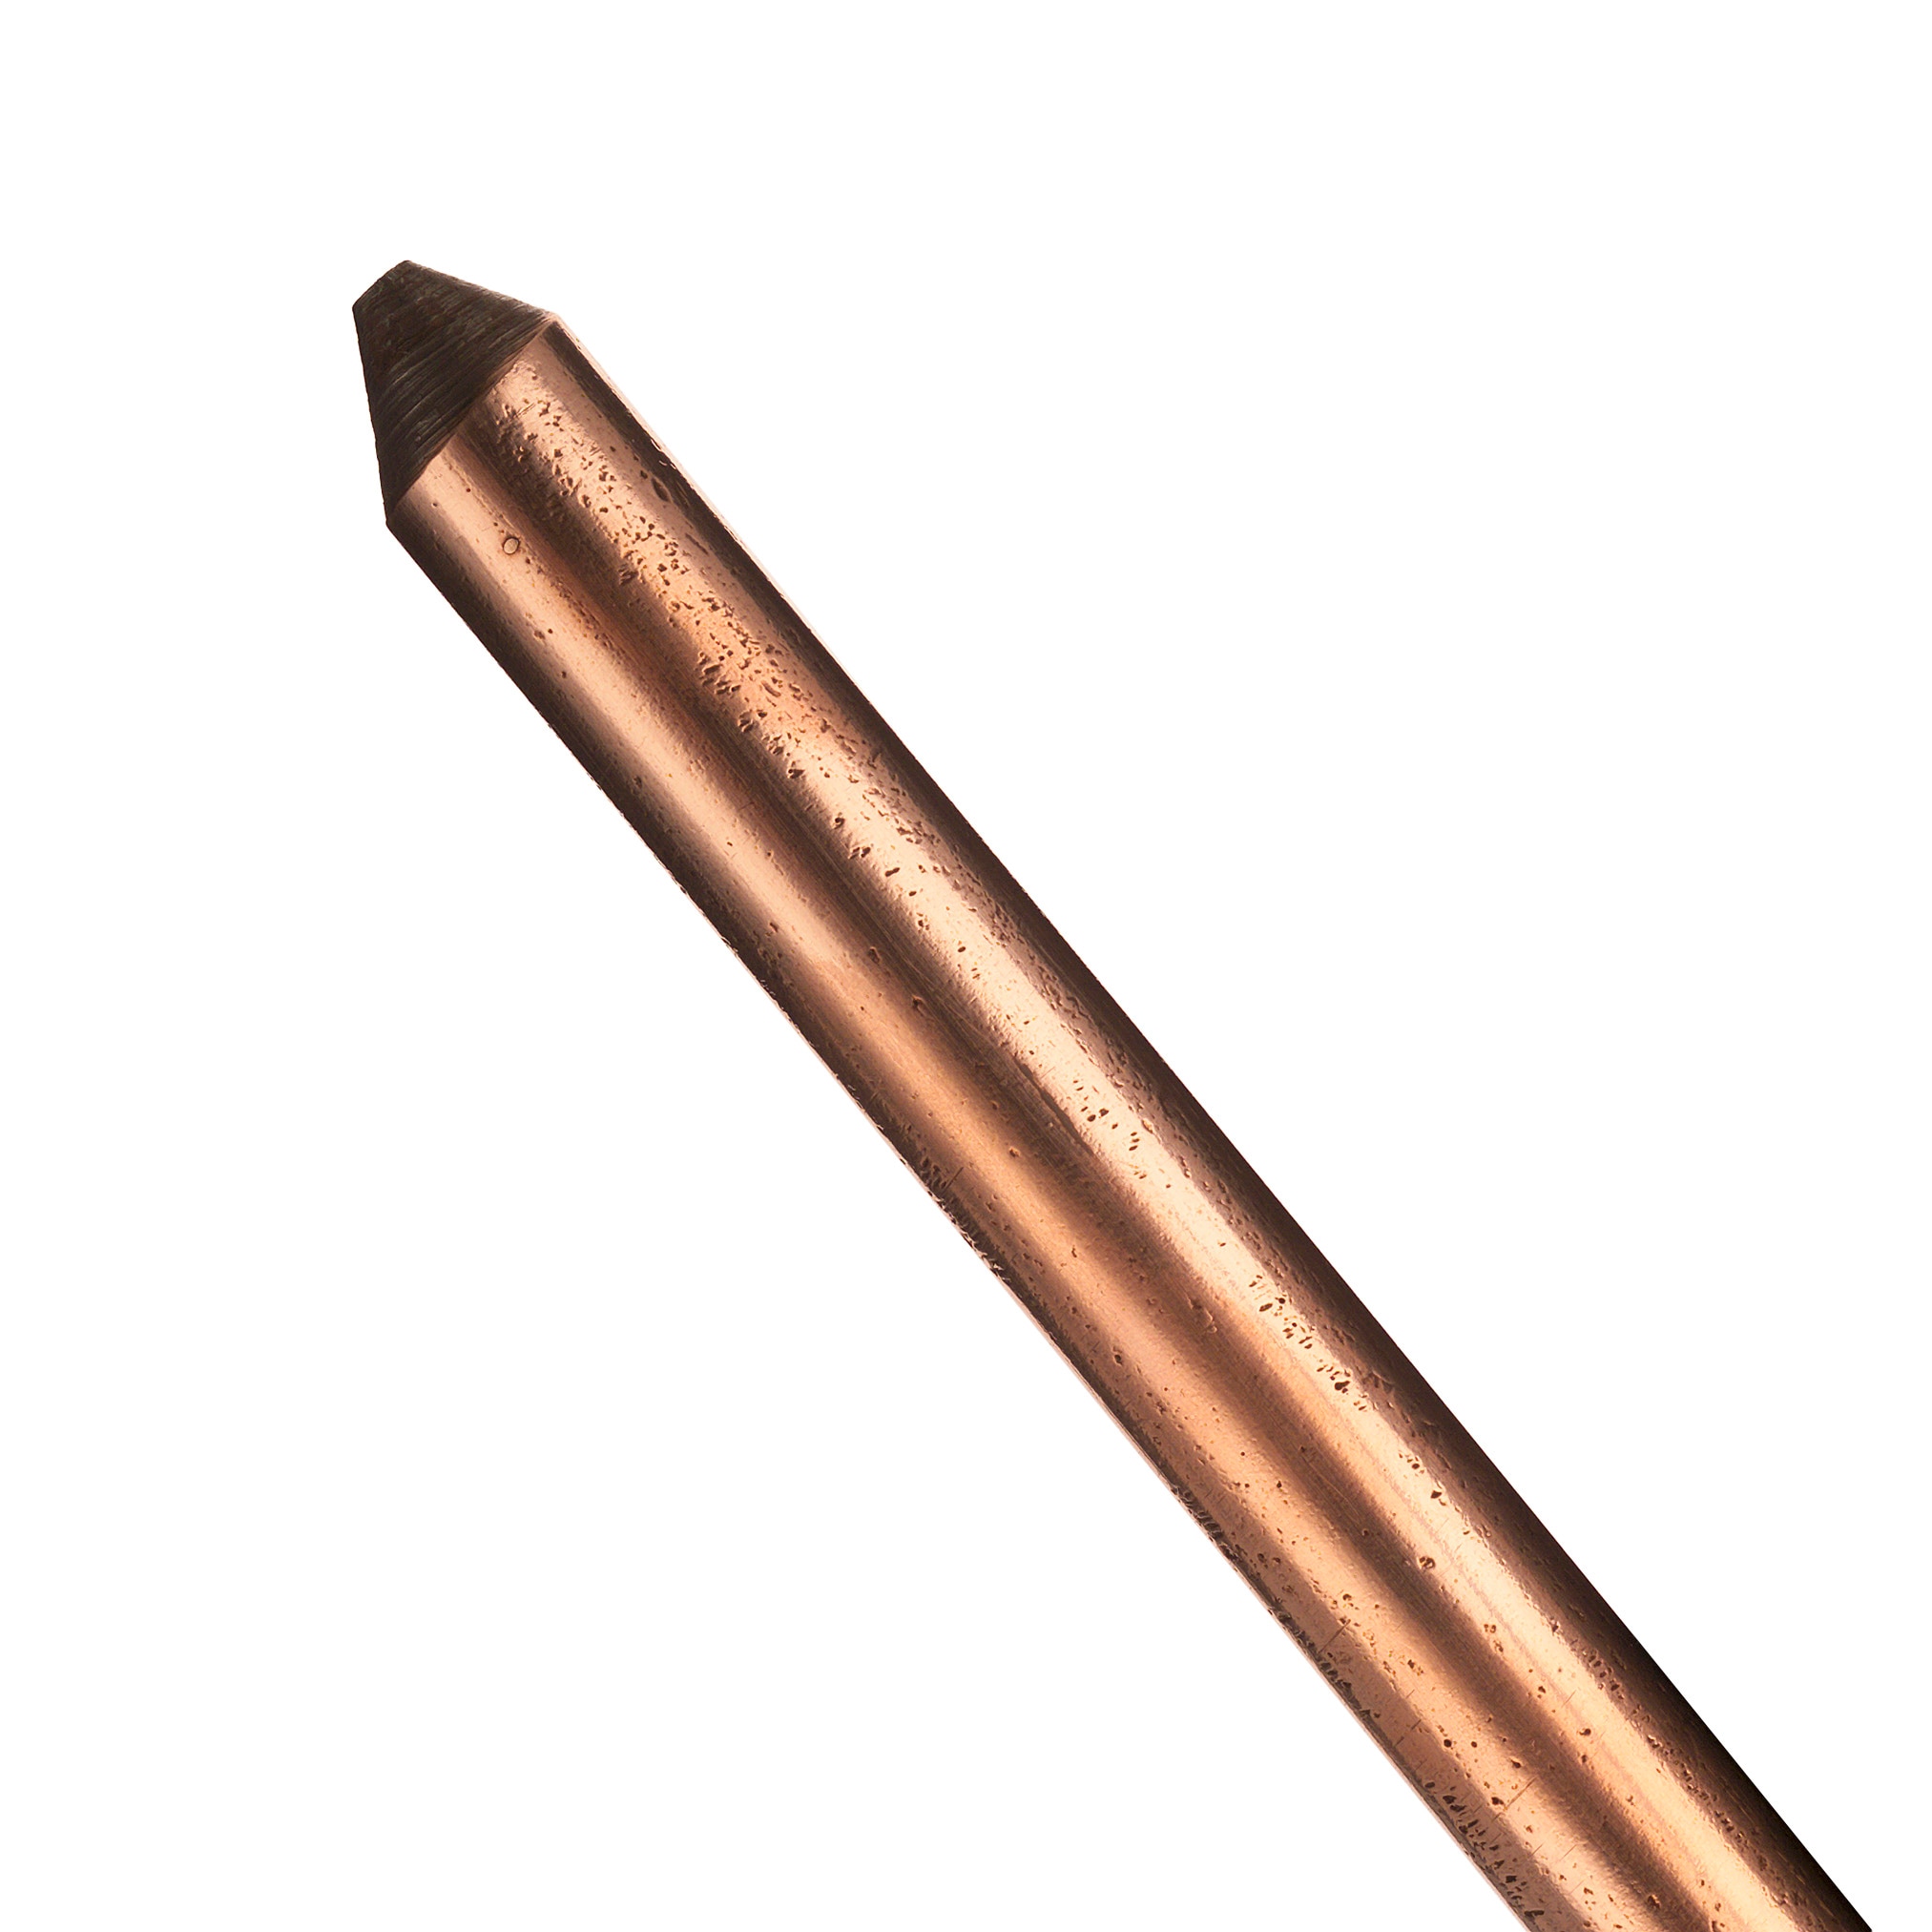 Galvan Copper Grounding Rods, 96-inch Length, UL Listed, Meets